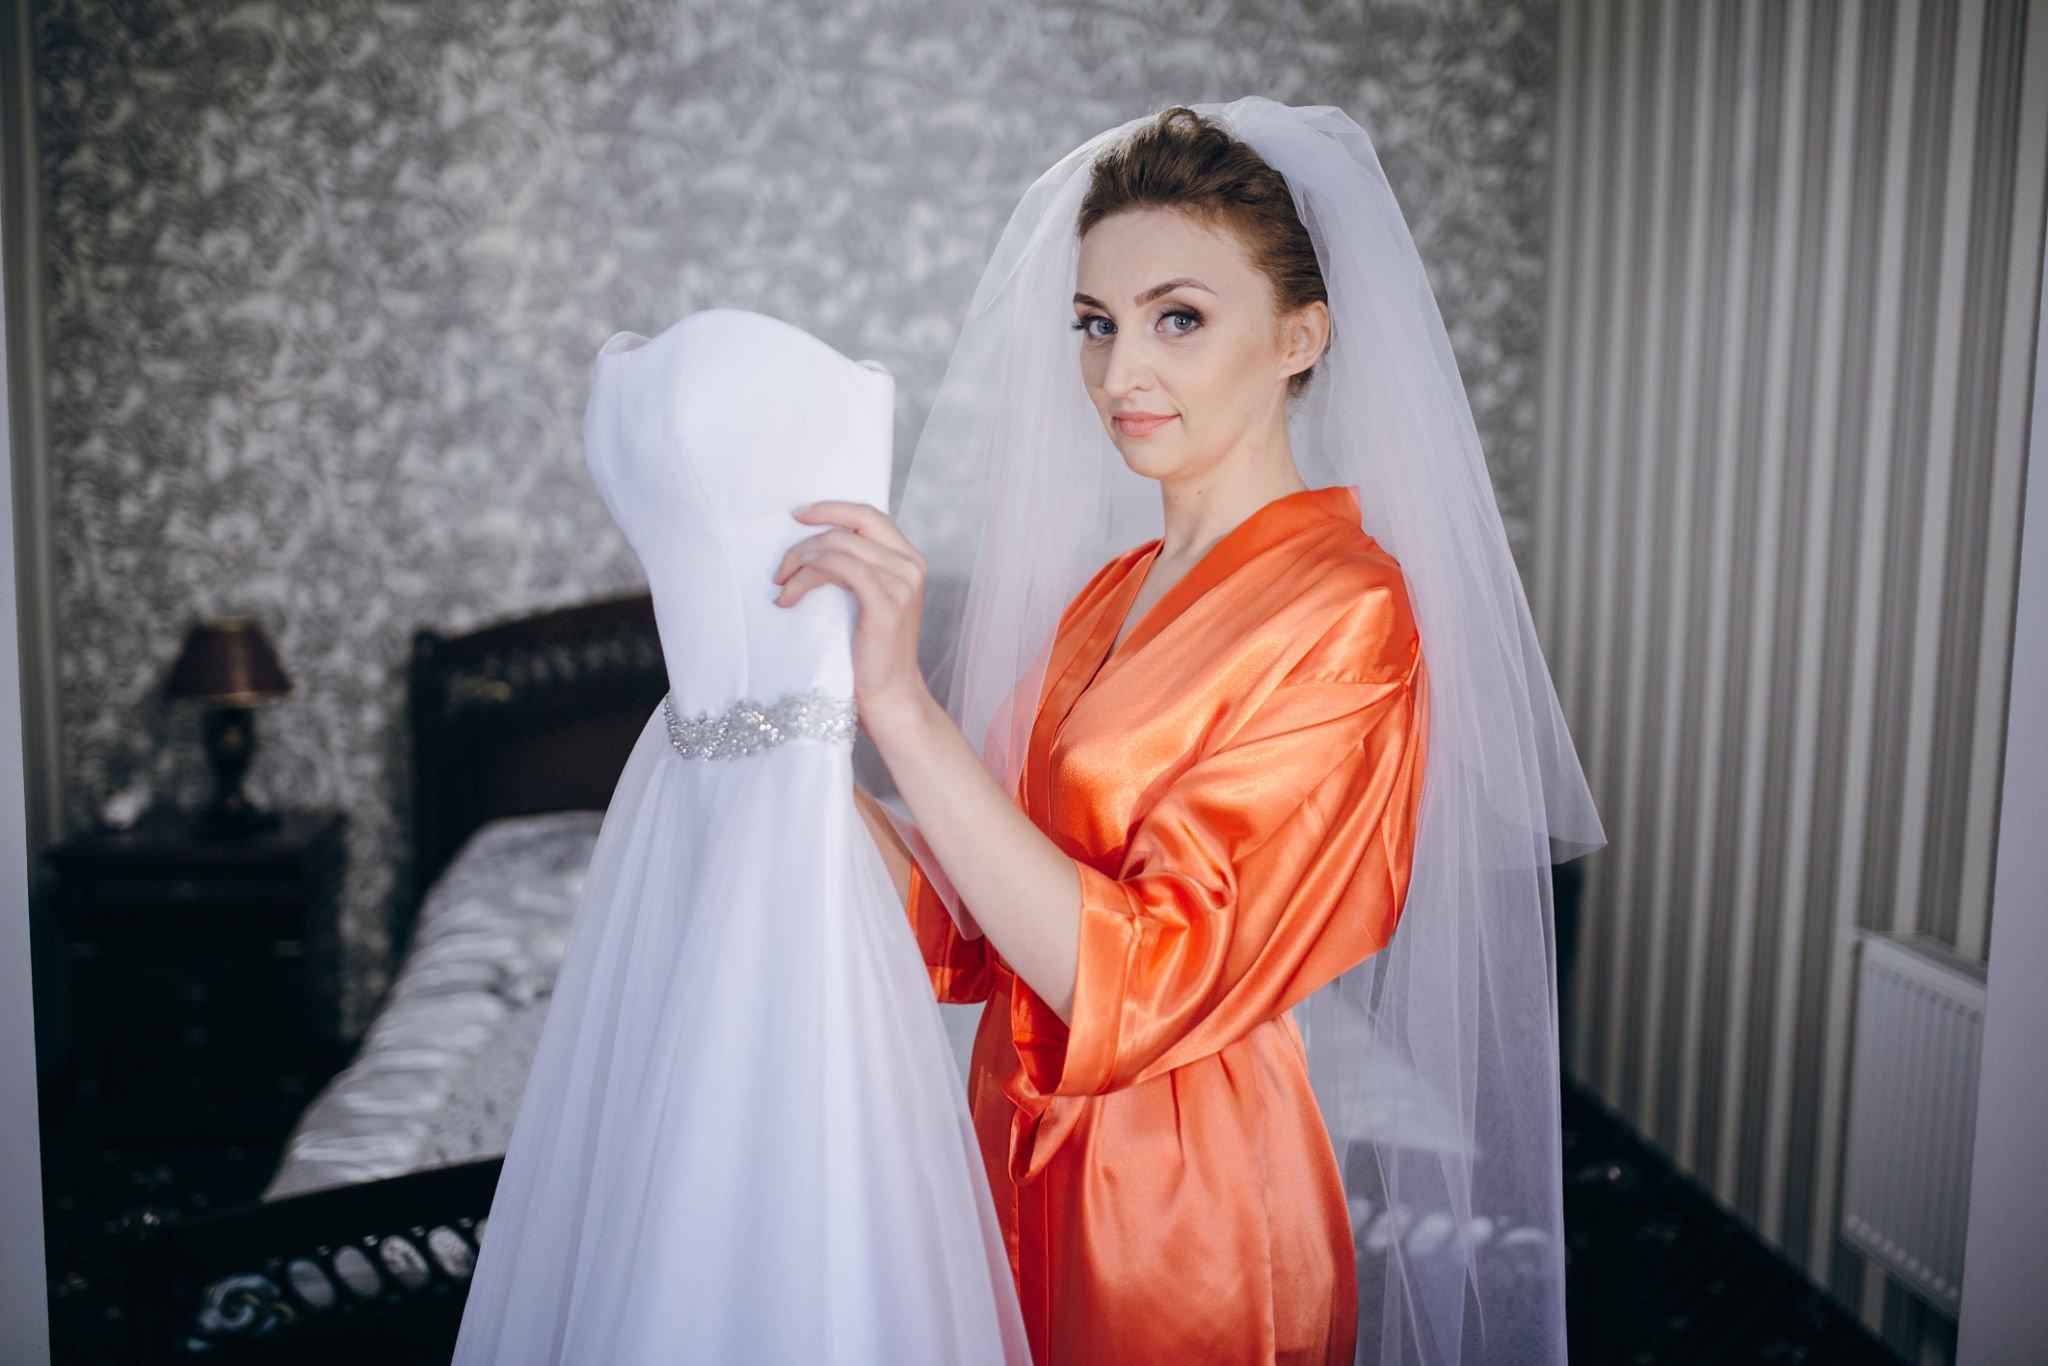 Directions to Buy an Inexpensive Maid-matron of Honour Gown